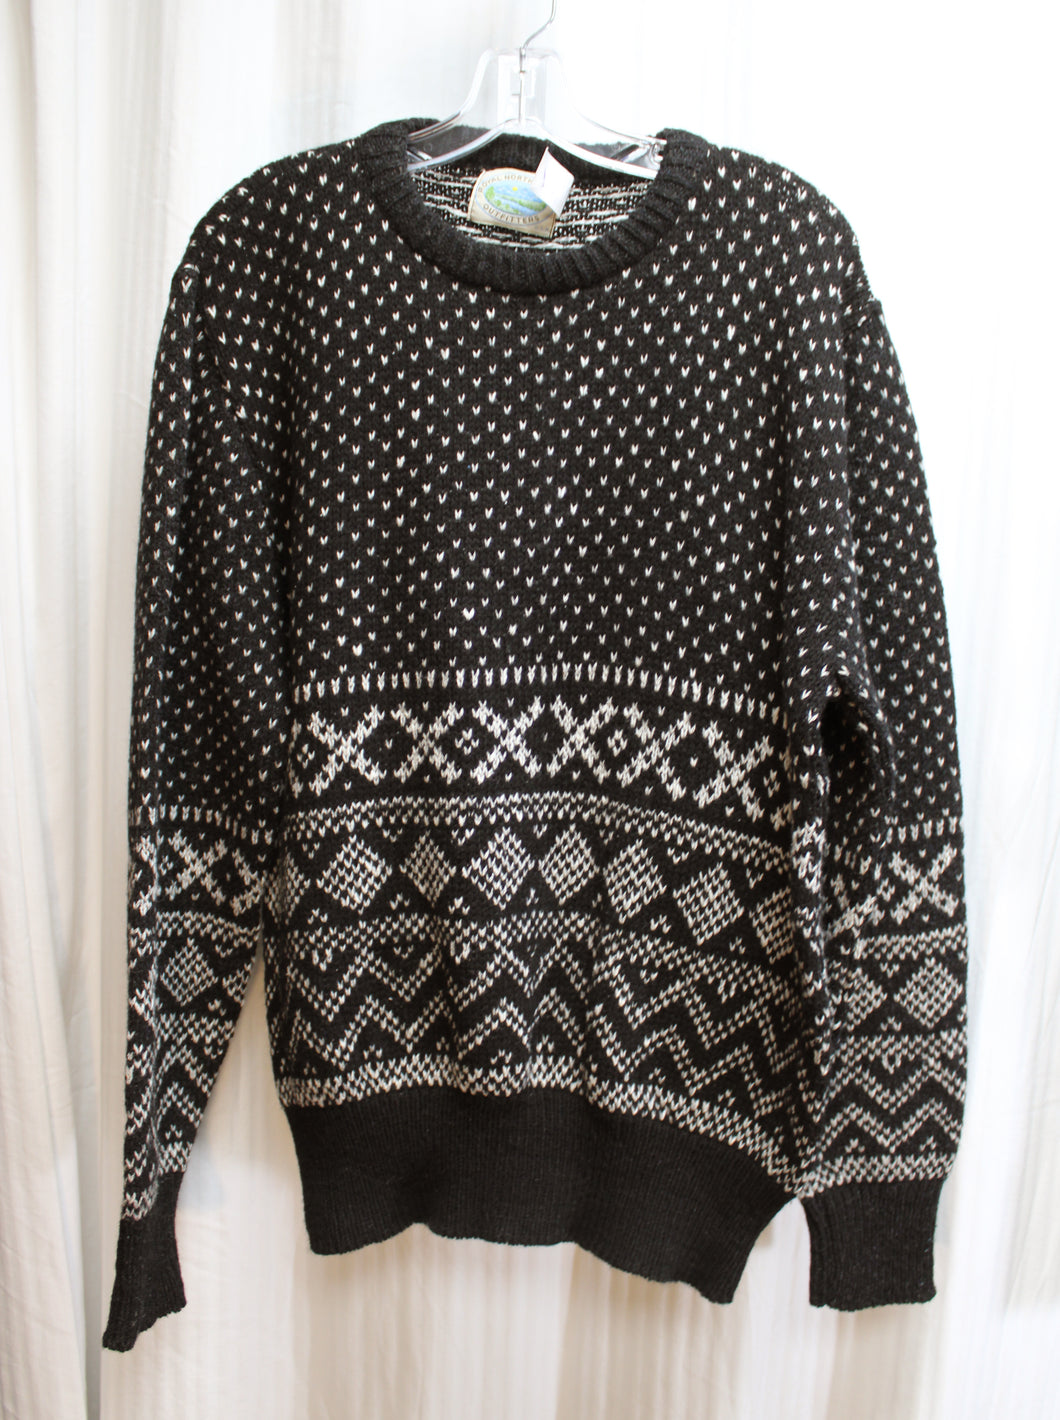 Men's Vintage - Royal North Mills Outfitters - - Black & White Fair Isle Wool Sweater - Size M